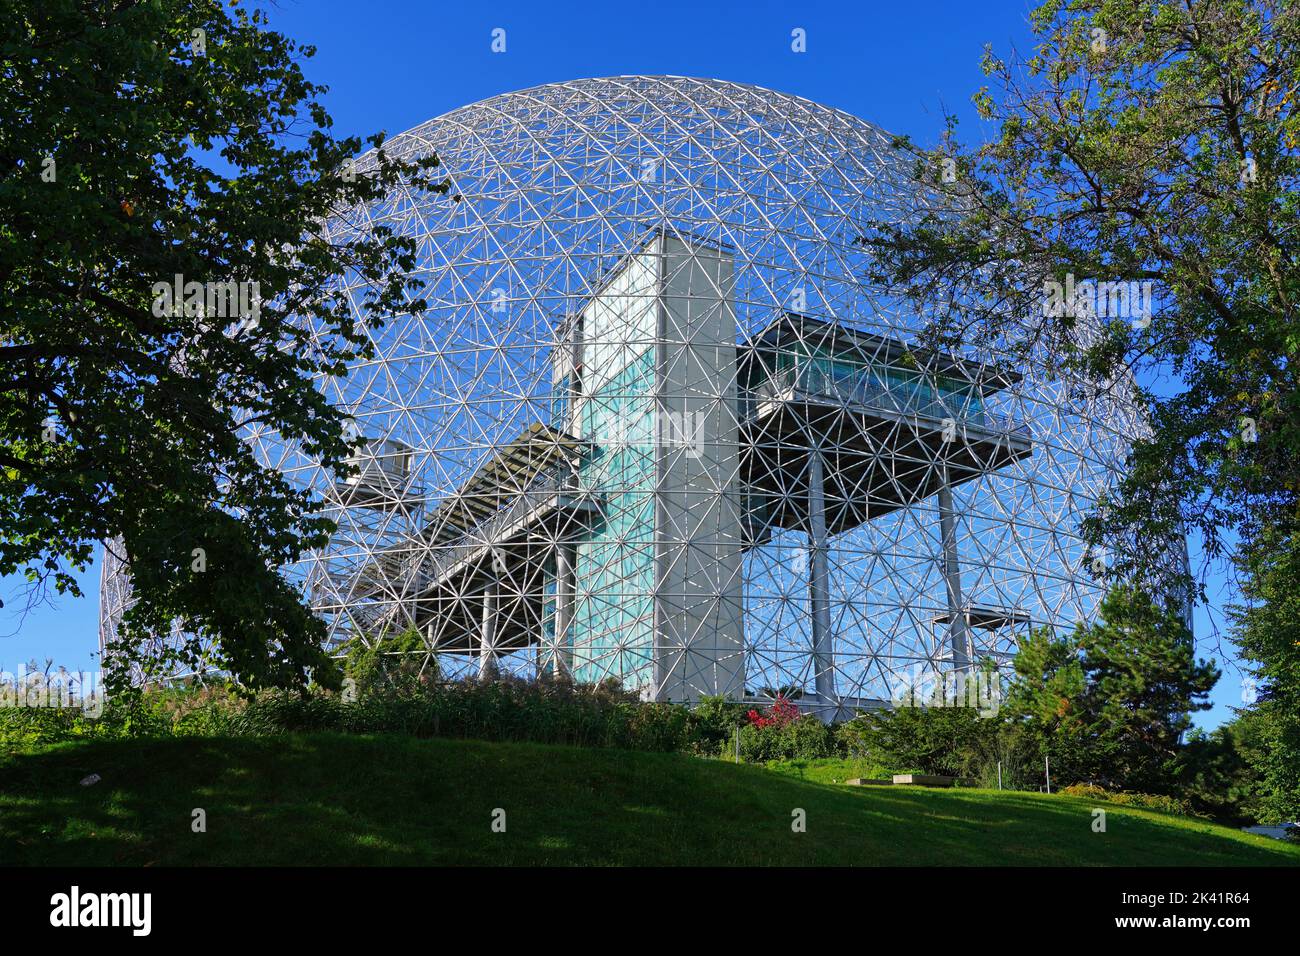 MONTREAL, CANADA -14 SEP 2022- View of the Montreal Biosphere, an environment museum in a former Expo 67 pavilion located in Parc Jean Drapeau on St H Stock Photo